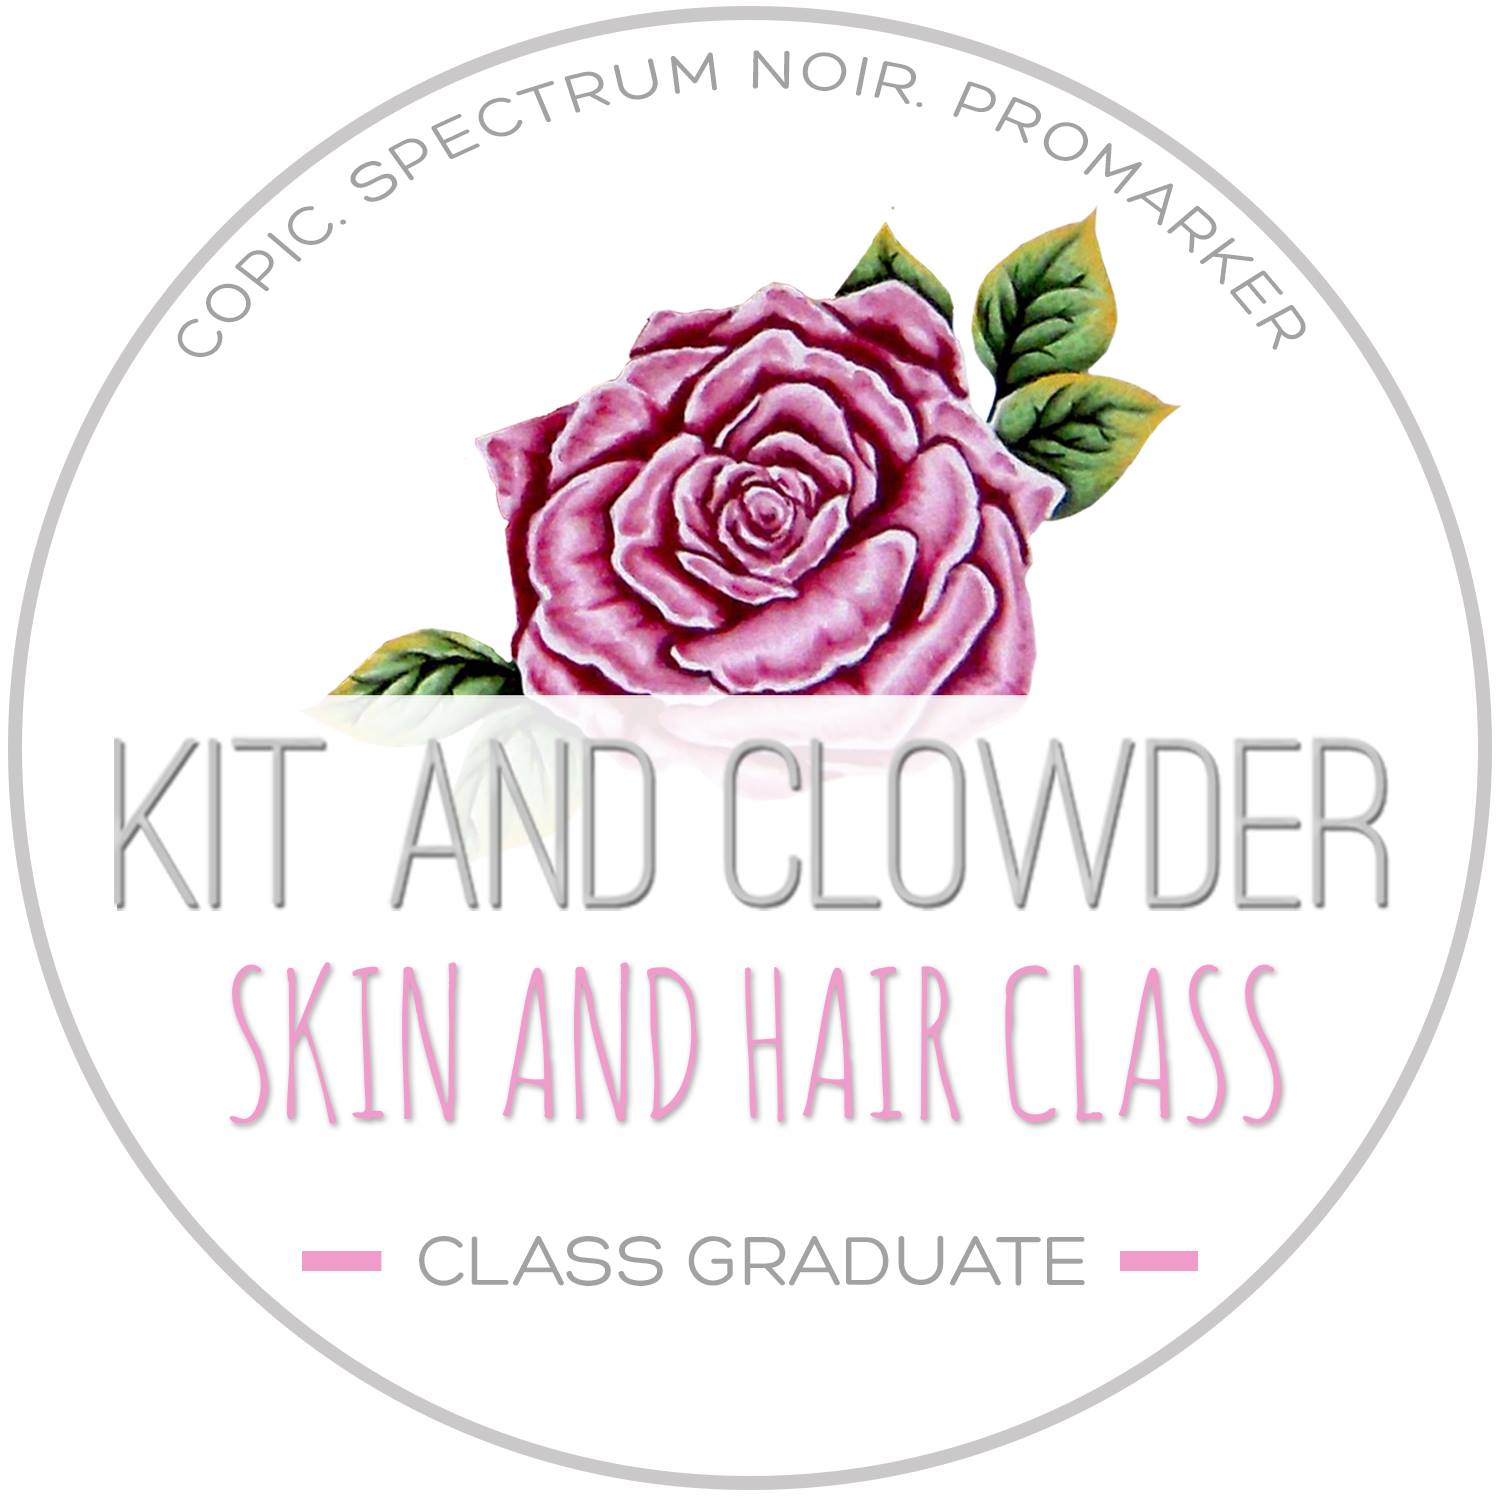 Kit and Clowder Skin and Hair Technique Class Graduate